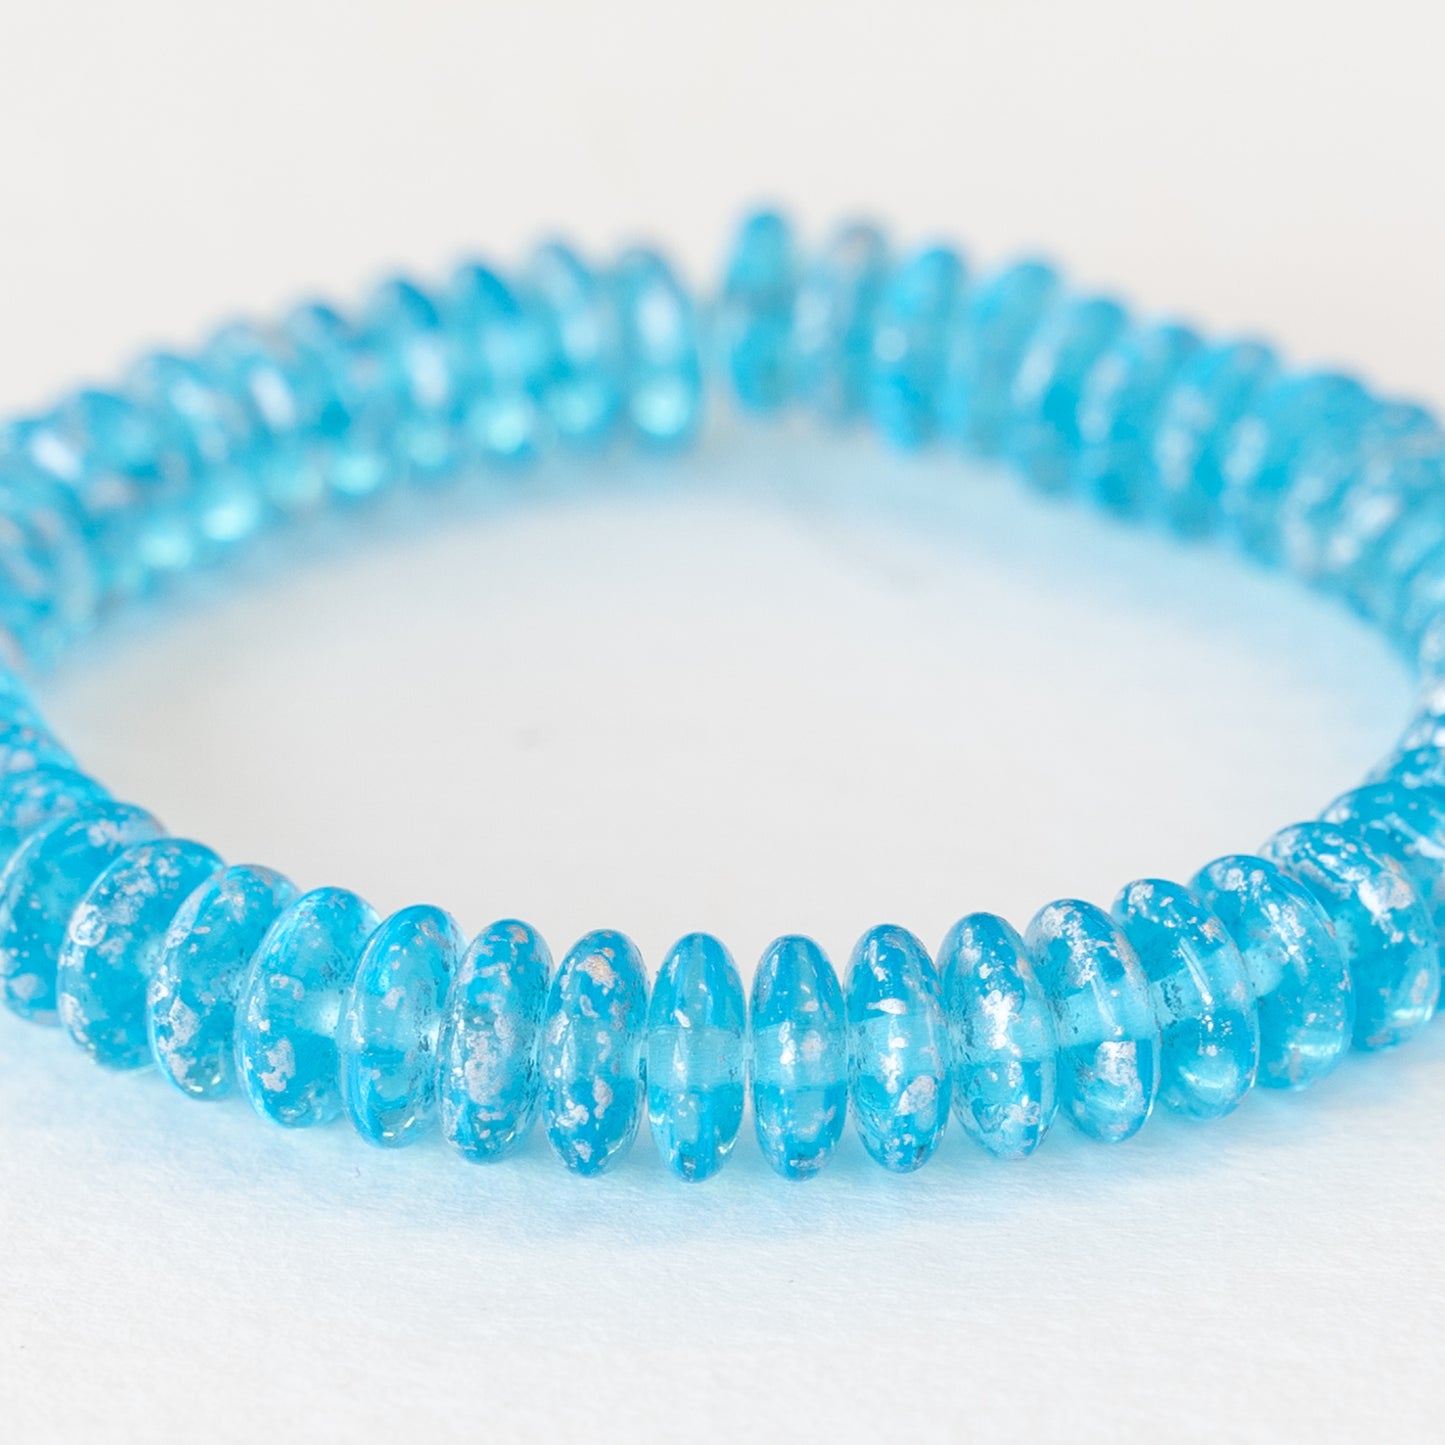 6mm Rondelle Beads - Frosted Aqua Silver Dust - 50 Beads